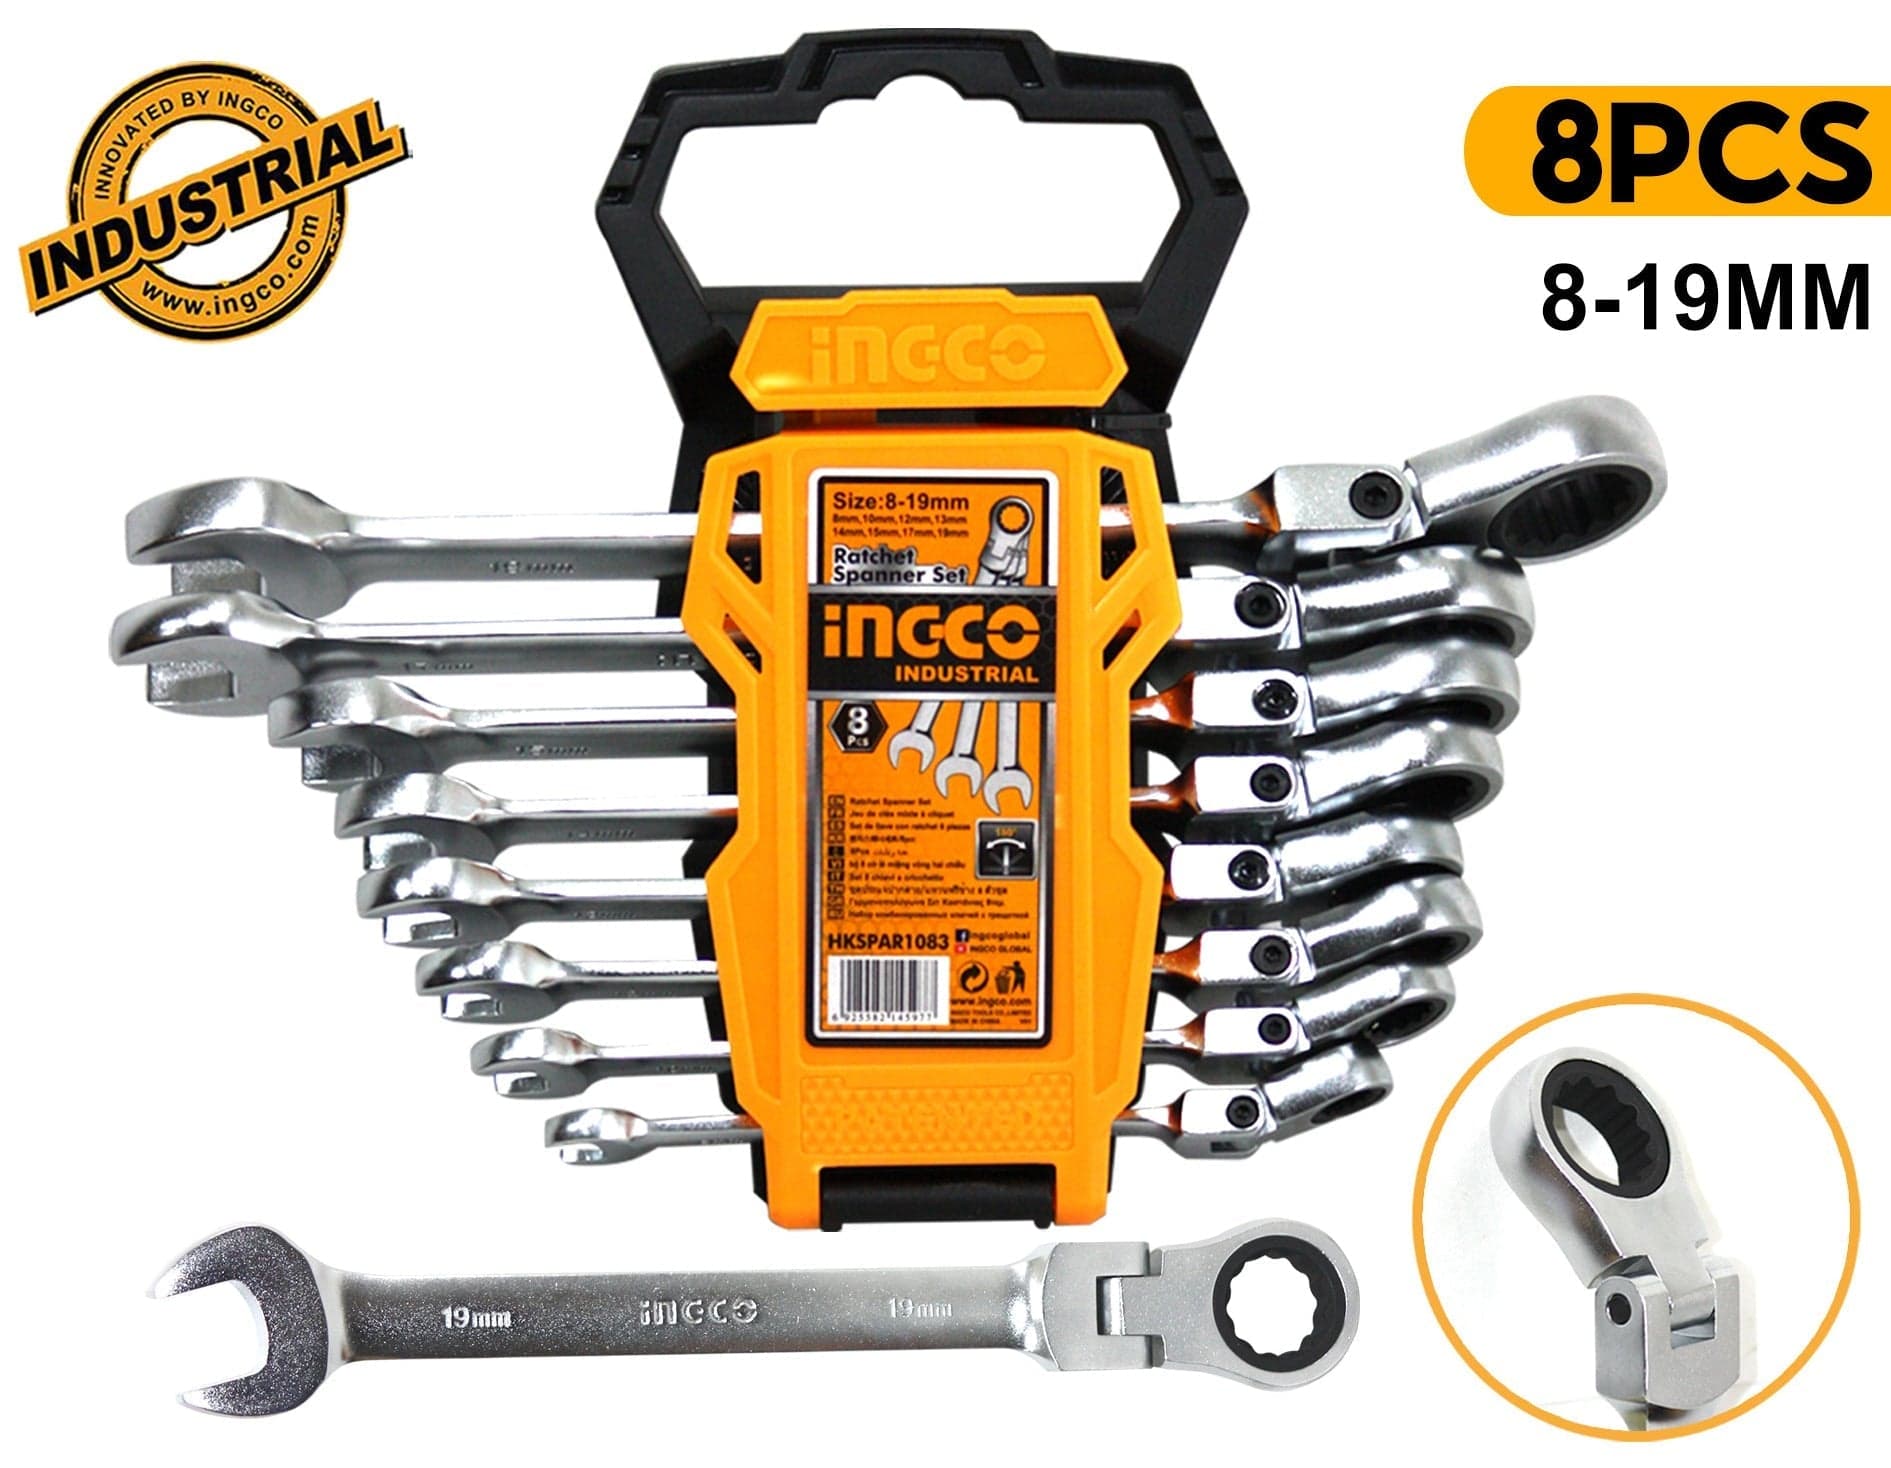 Ingco 8 Pieces Flexible Ratchet Spanner Set 8-19mm - HKSPAR1083 | Supply Master | Accra, Ghana Wrenches Buy Tools hardware Building materials